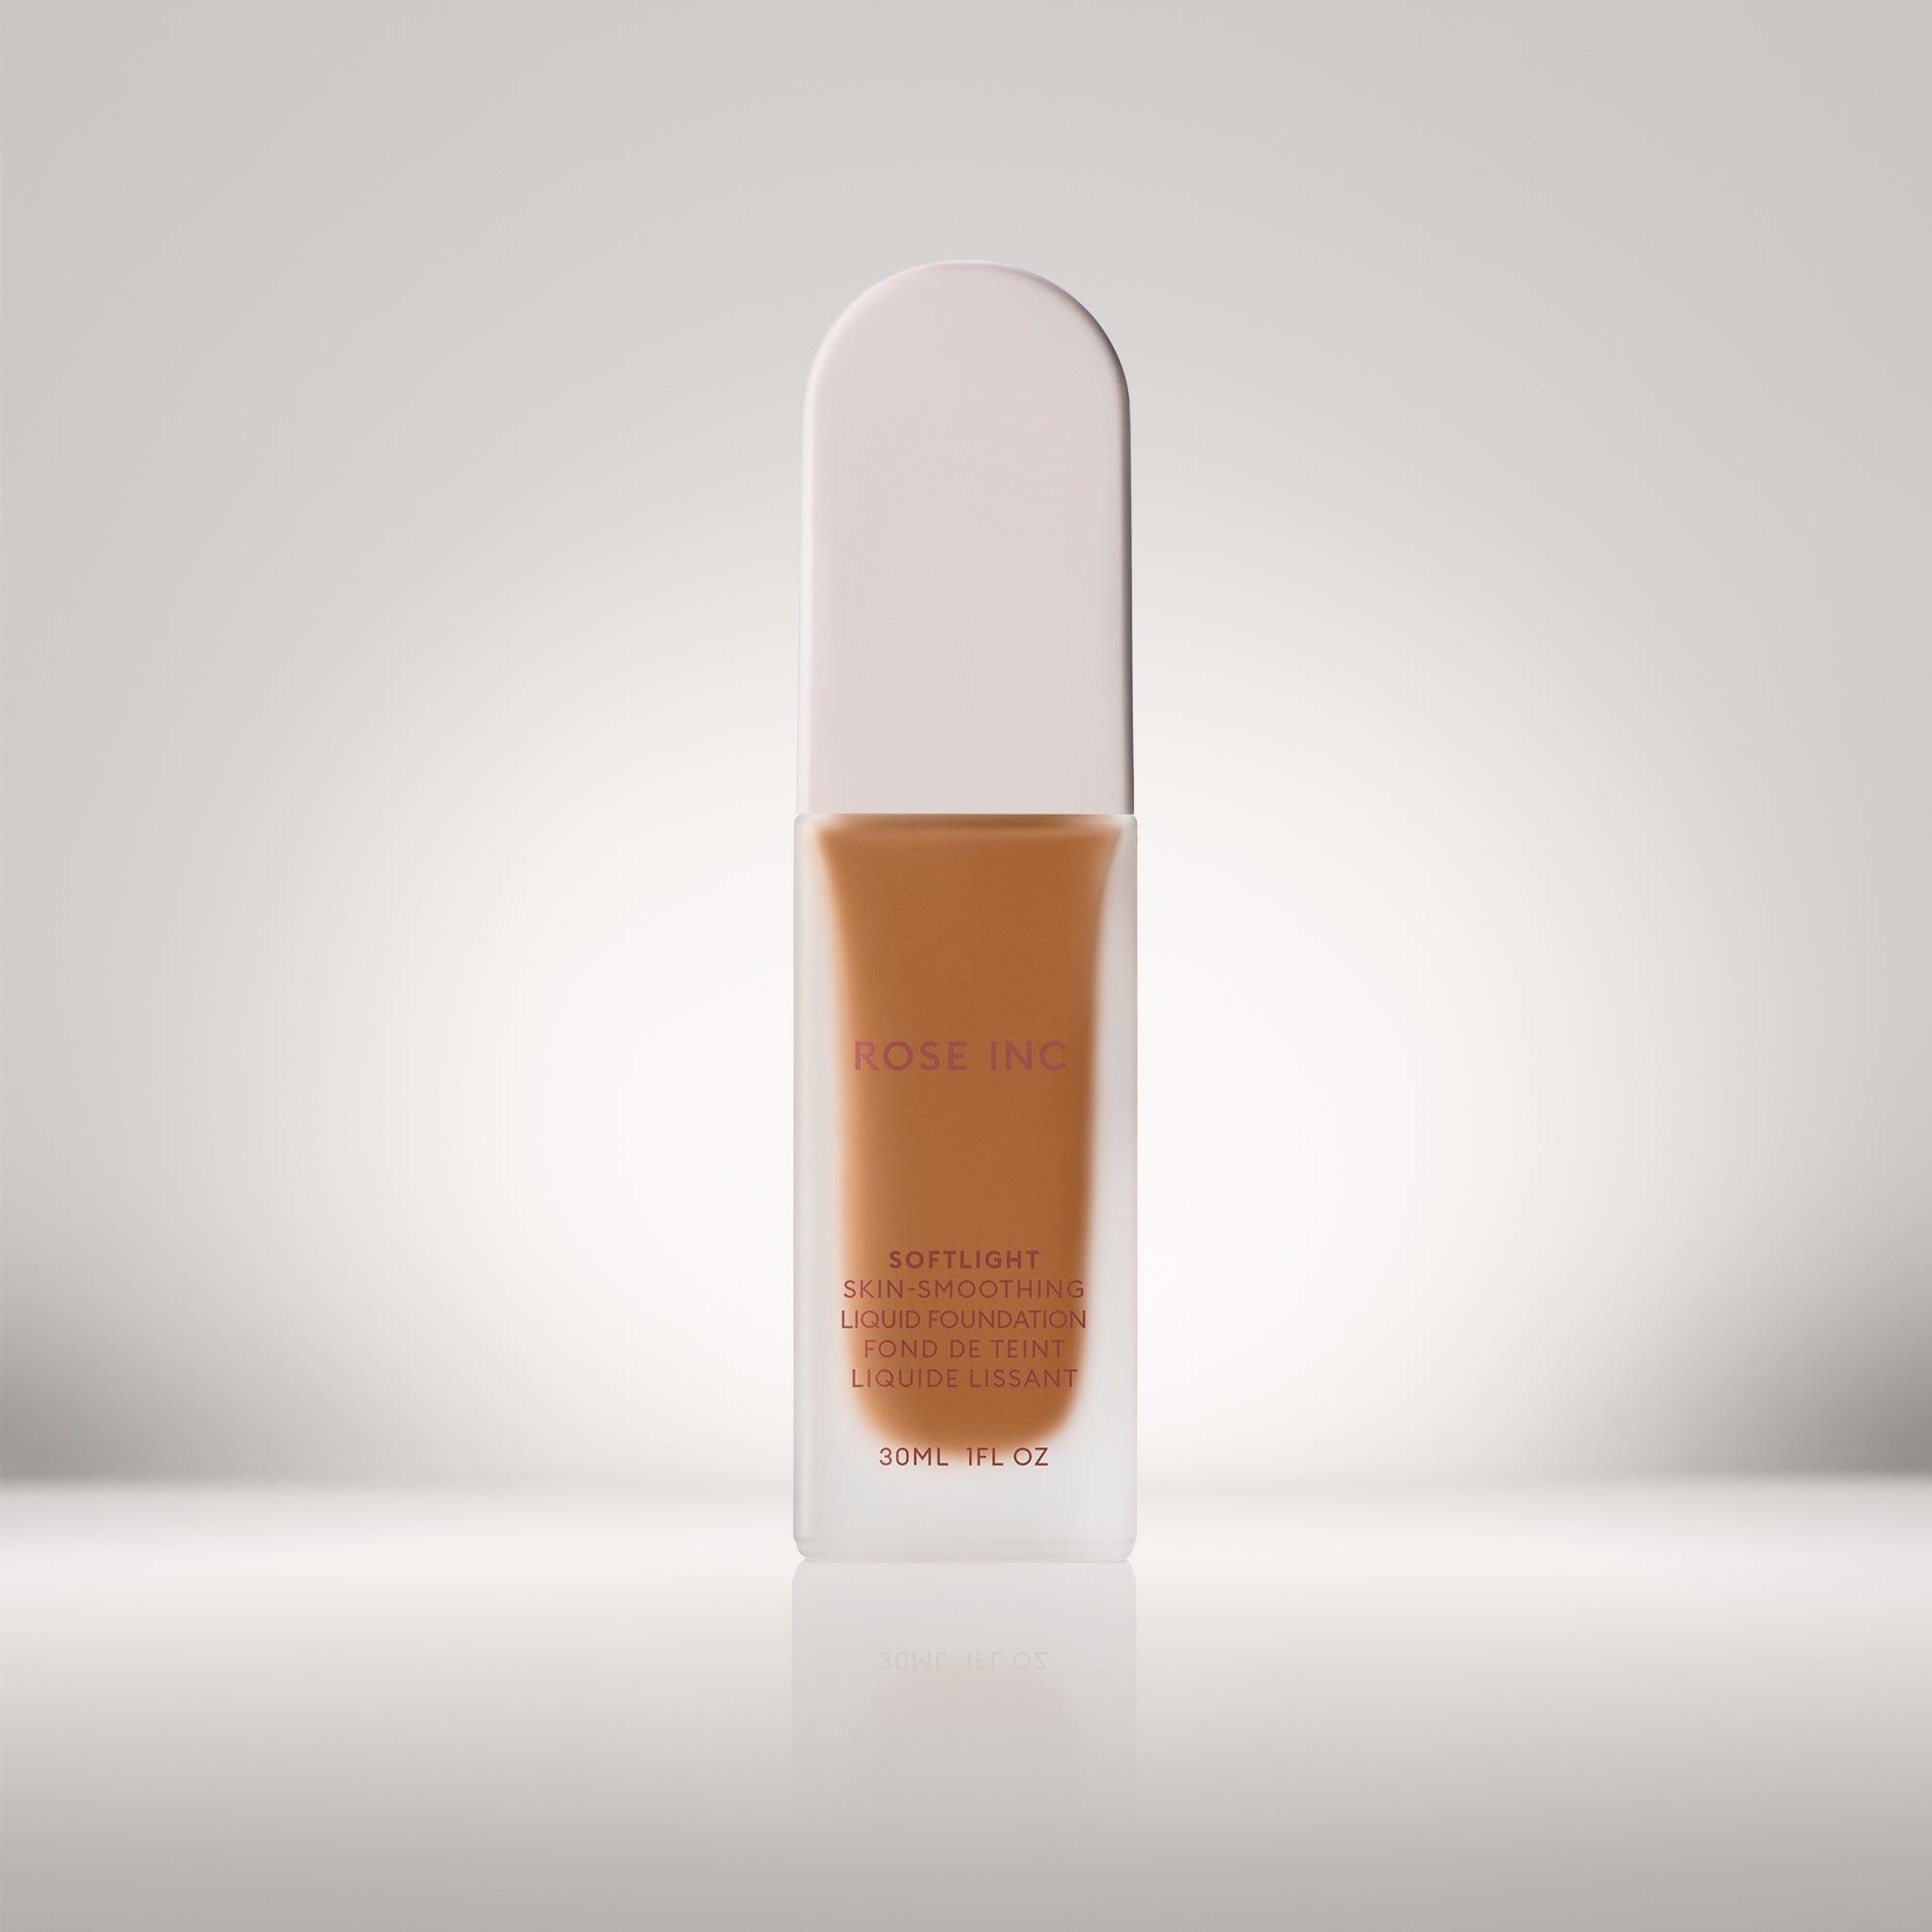 Soldier image of shade 25W in Softlight Smoothing Foundation